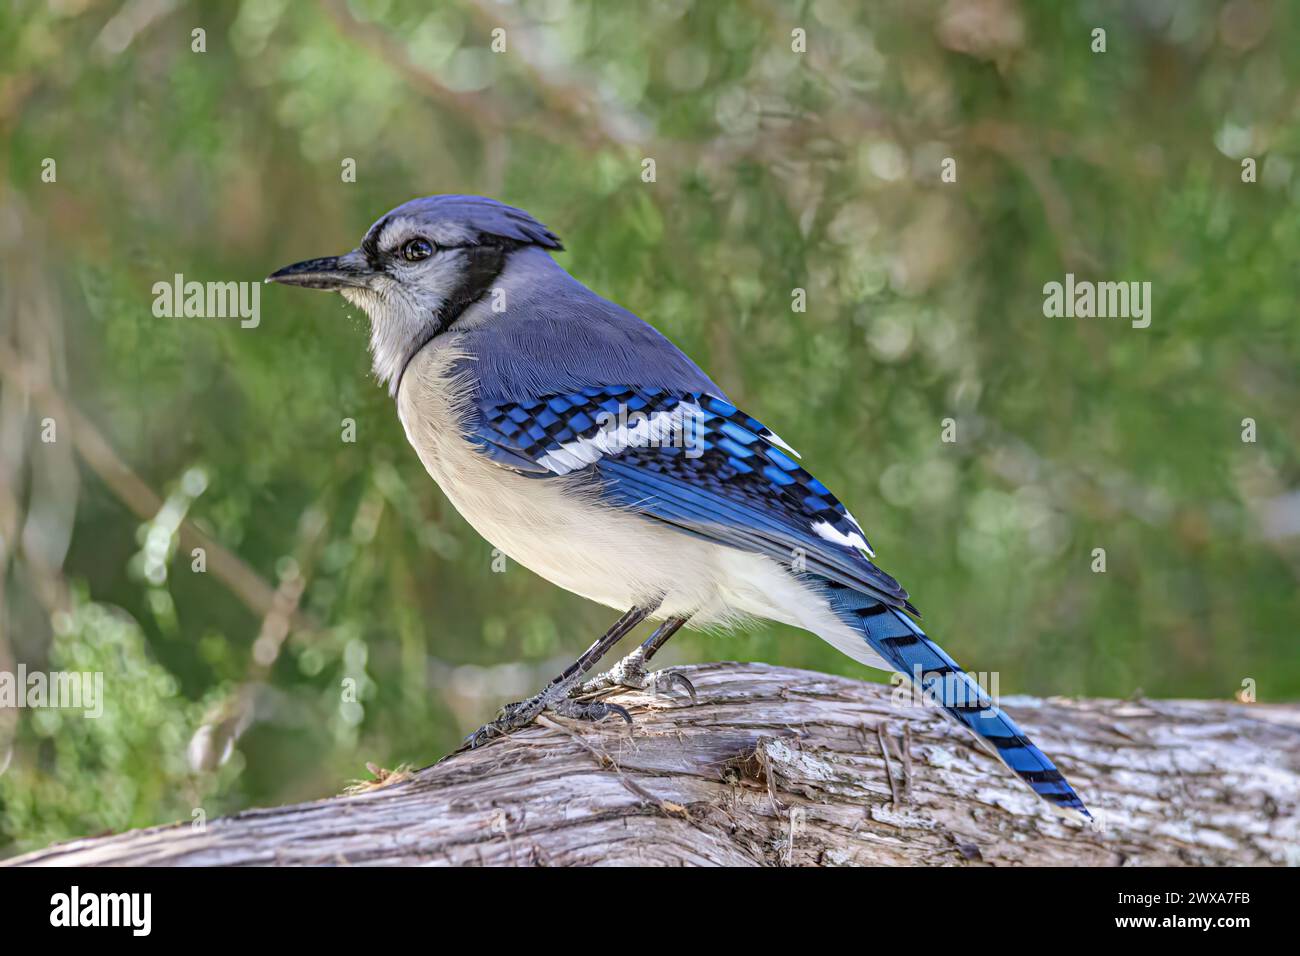 A Jay perched on a log in forest setting Stock Photo